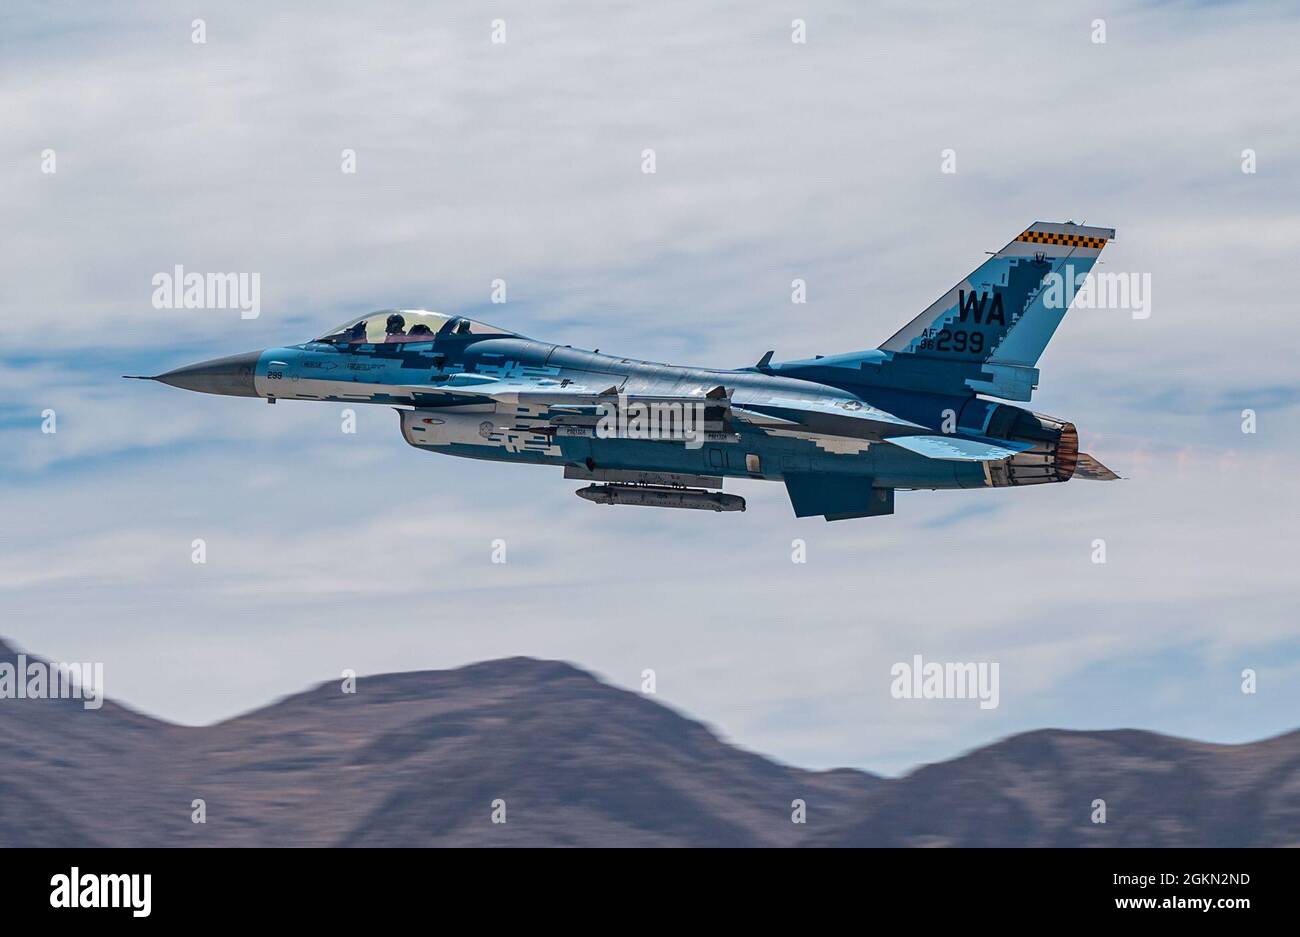 An F-16C Falcon fighter jet assigned to the 64th Aggressor Squadron, takes off  during a U.S. Air Force Weapons School Integration exercise at Nellis AFB, Nevada, June 2, 2021. Aggressor pilots are highly skilled in adversarial tactics and provide realism to U.S. and allied forces during training exercises. Stock Photo